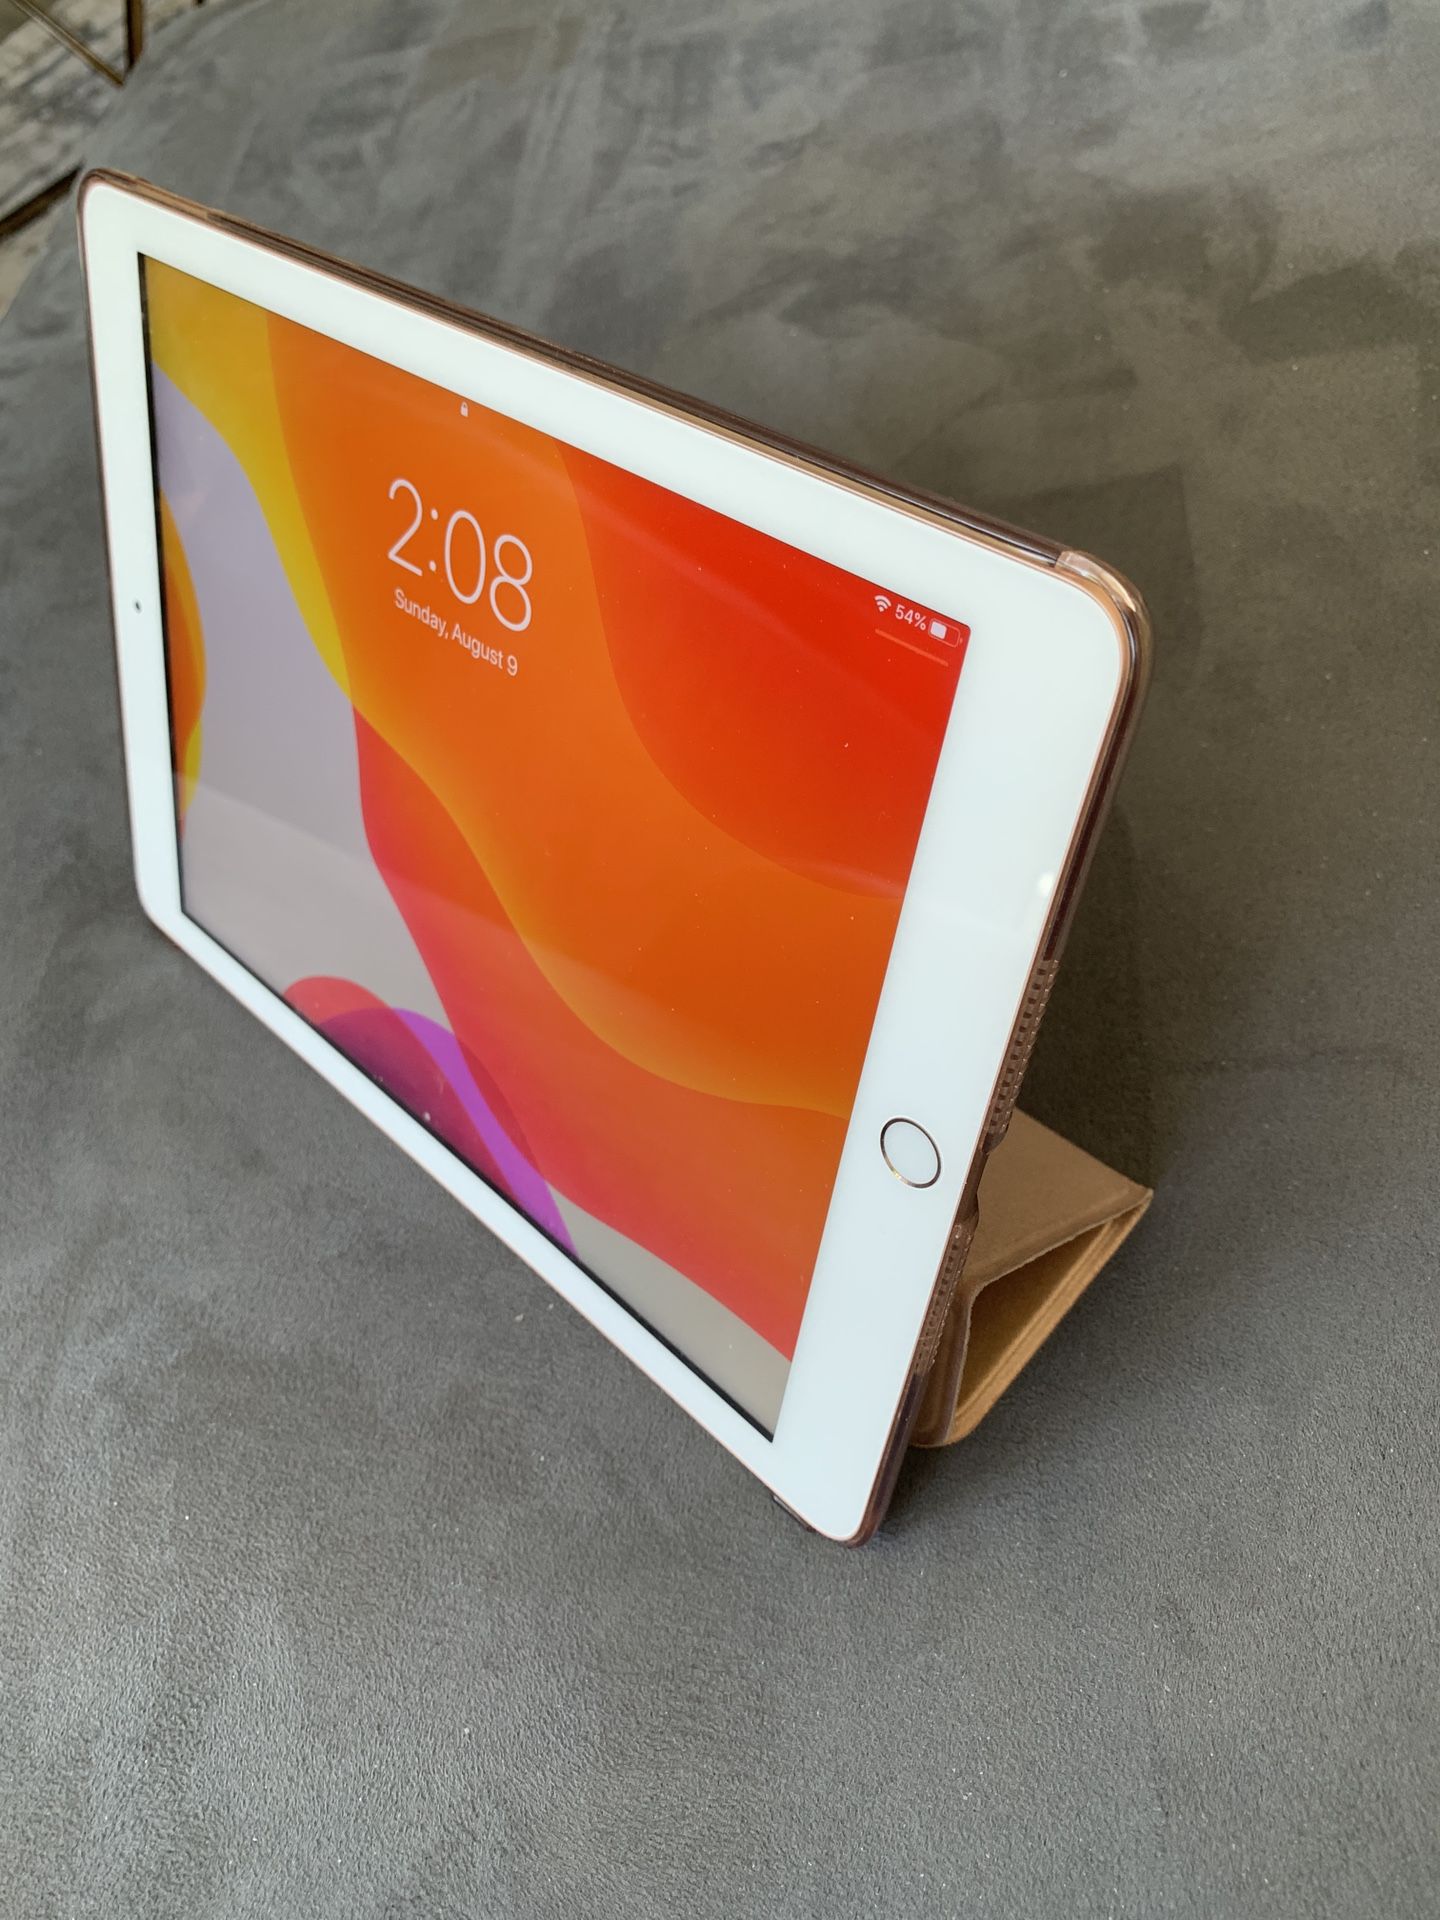 iPad Gold 32 GB 6th Generation great condition